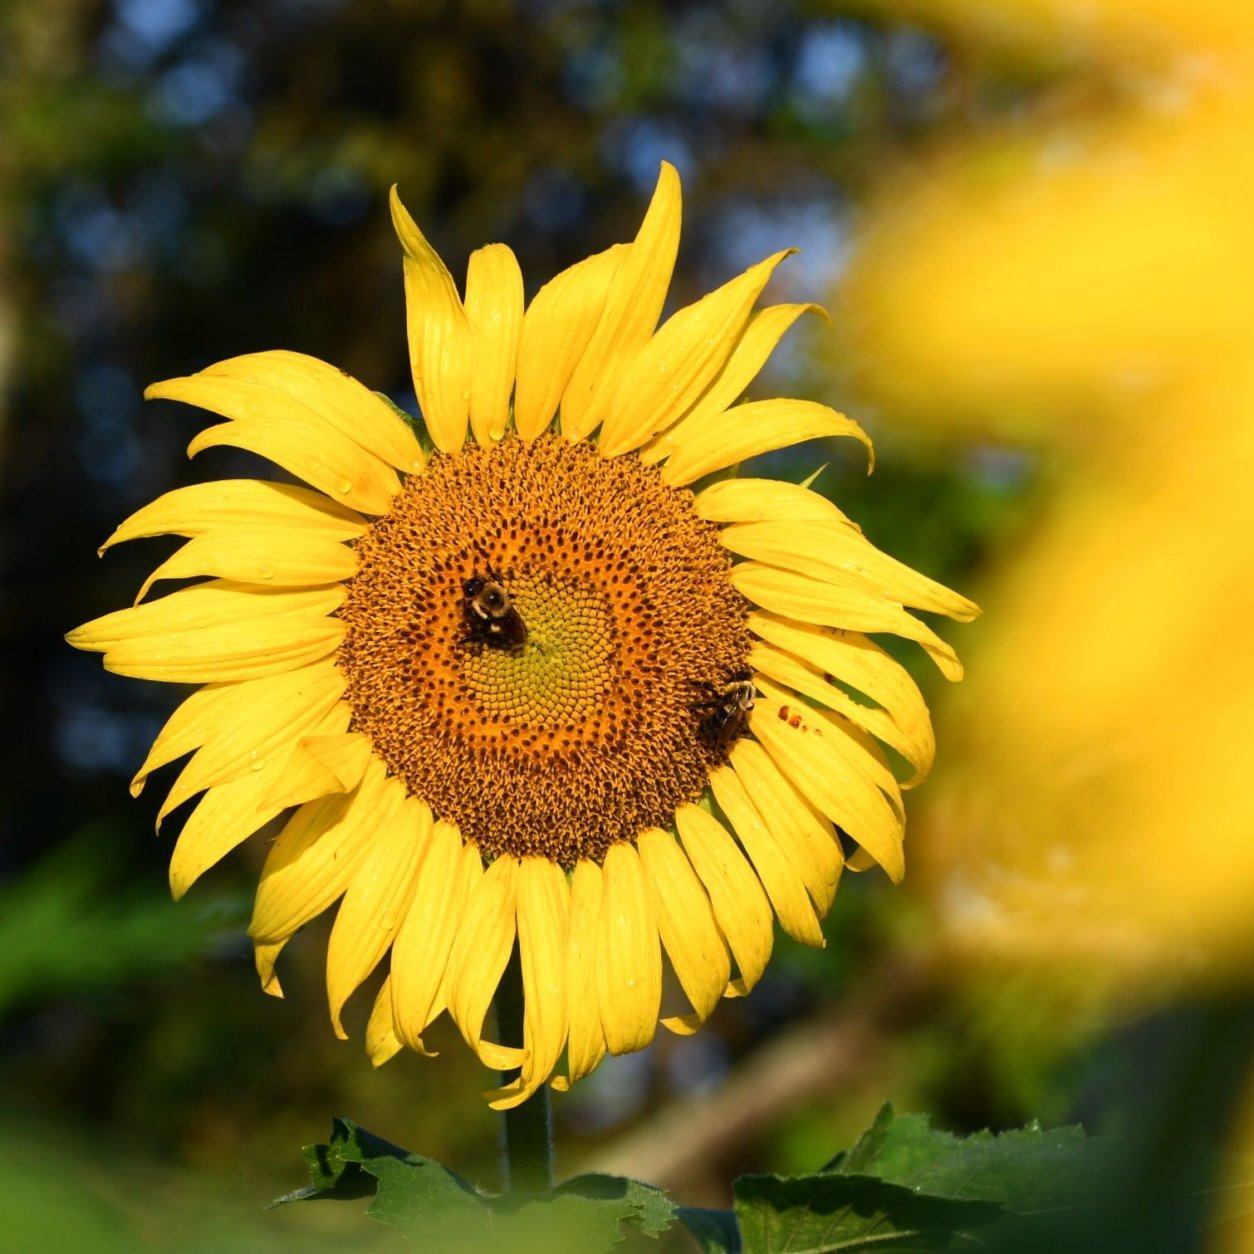 Bees on a sunflower